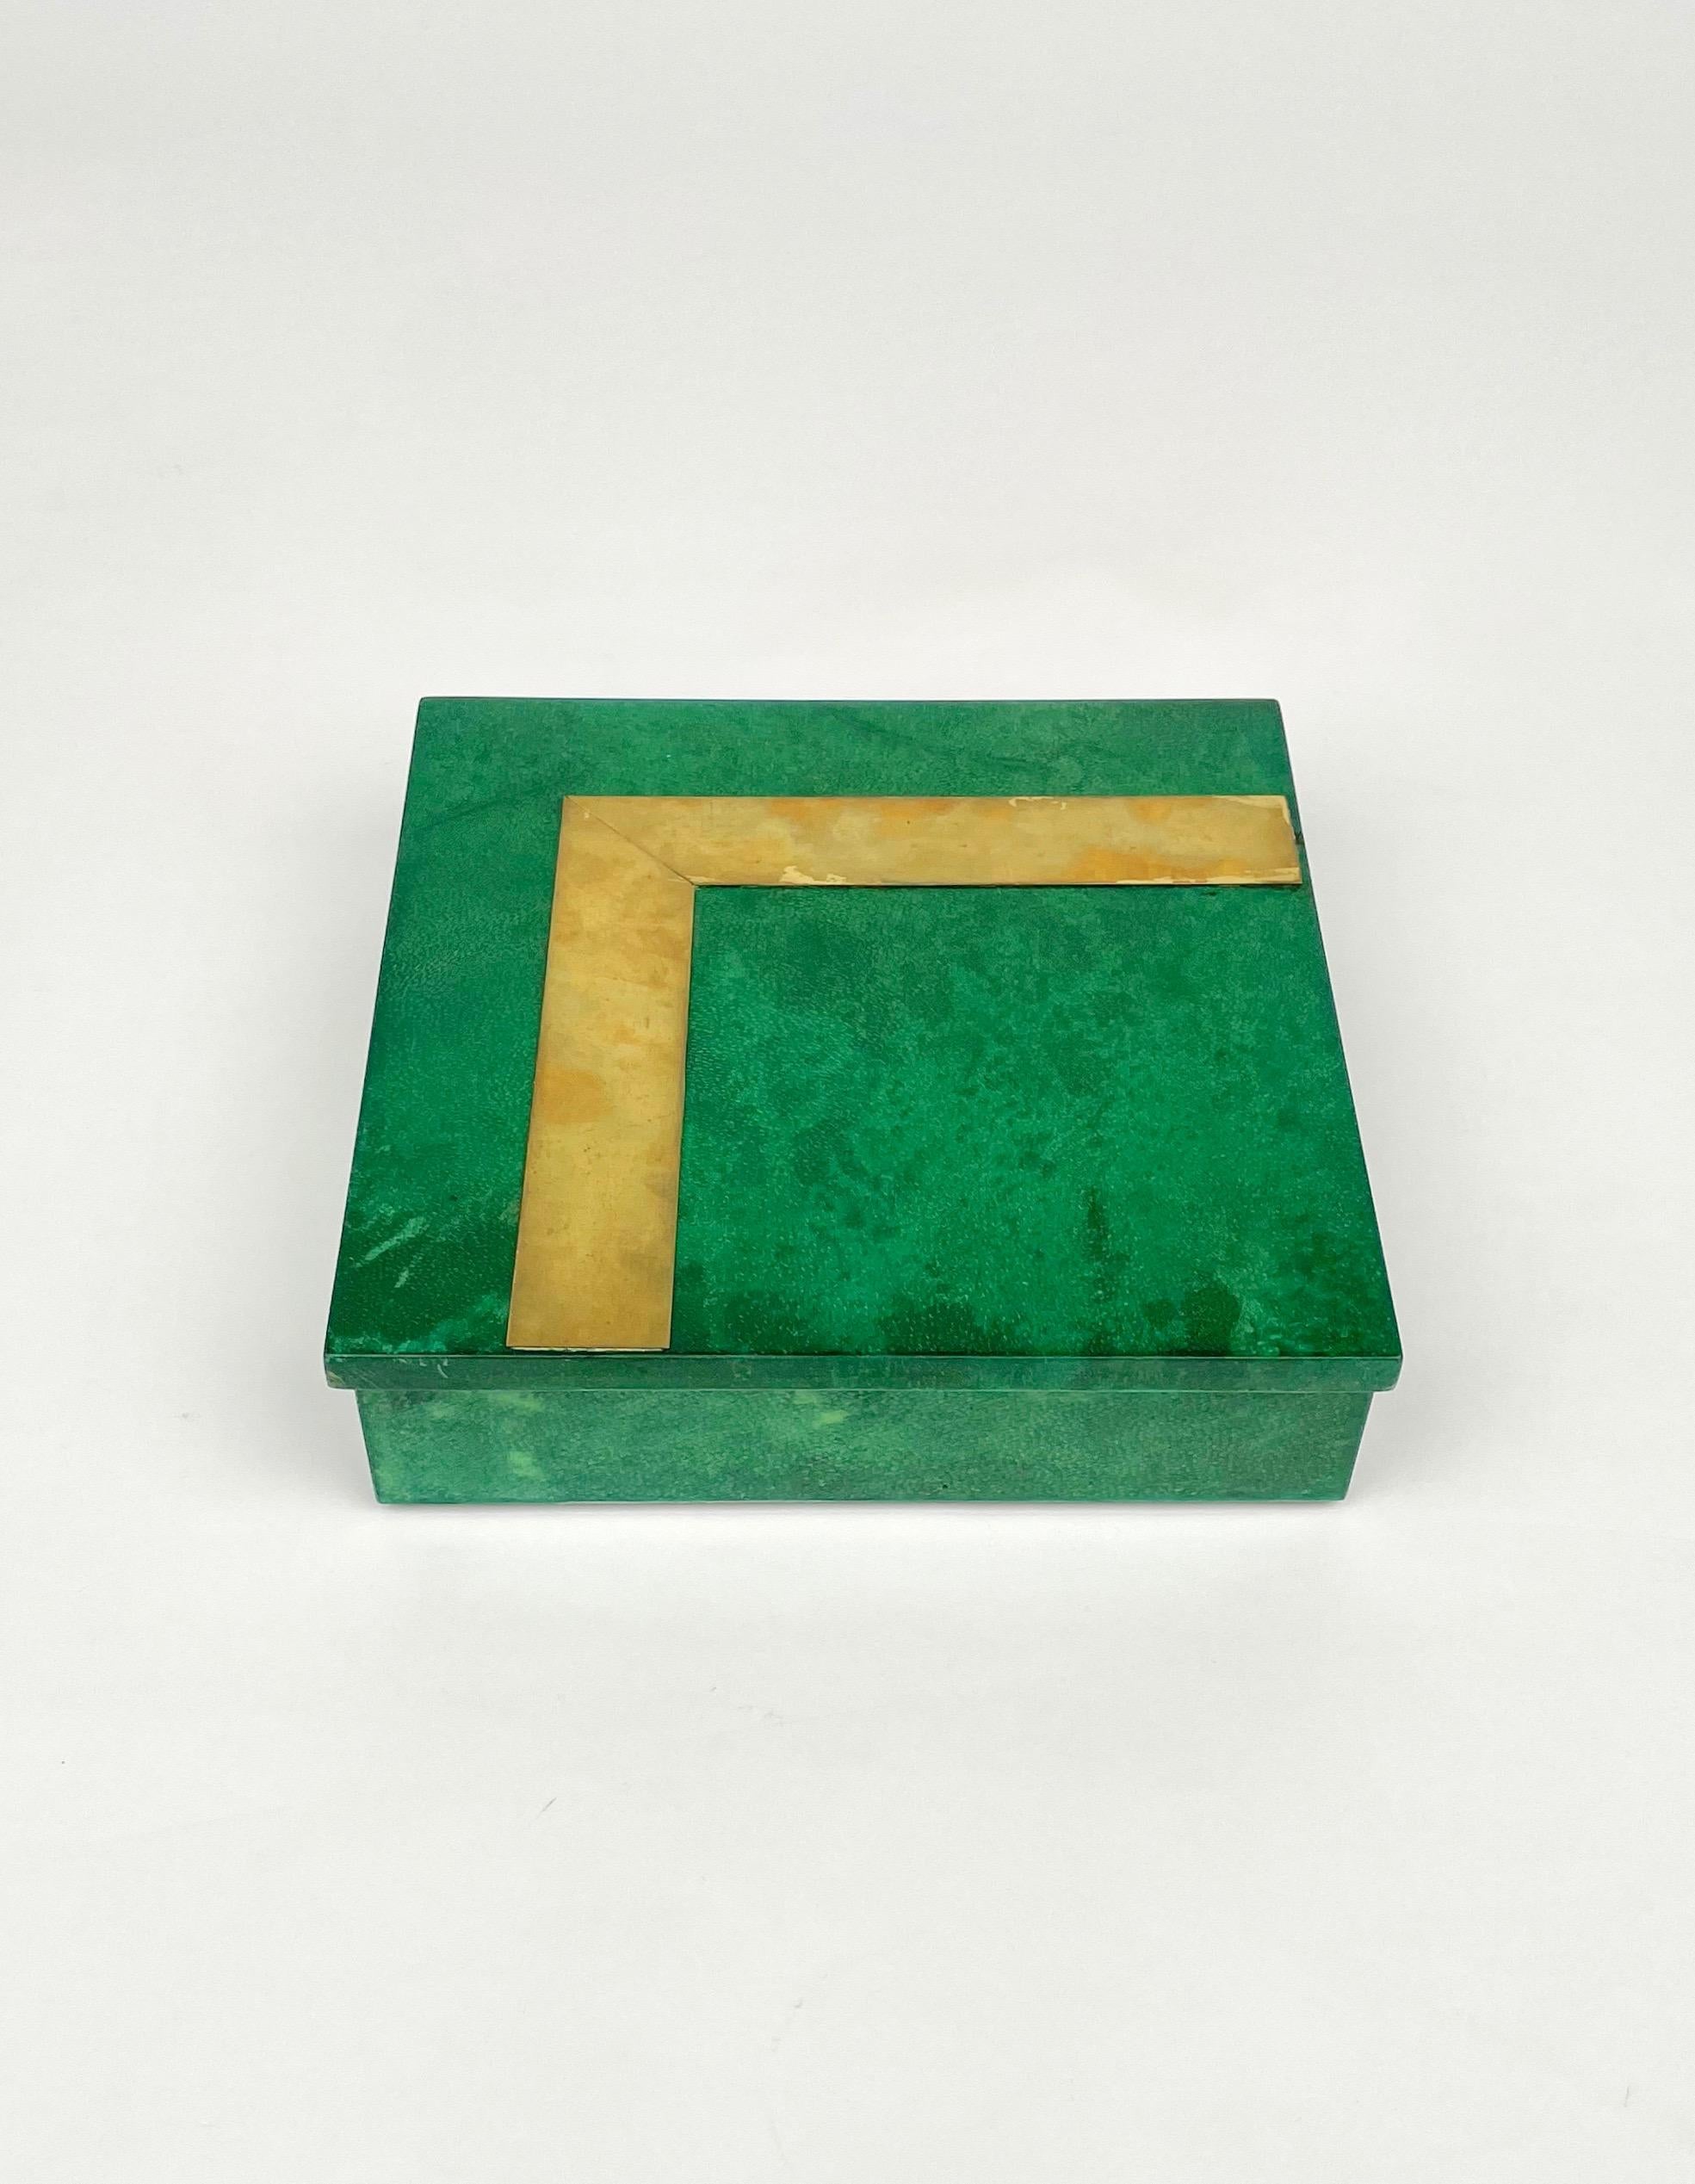 Squared box in green goatskin with brass details attributed to the Italian designer Aldo Tura.

Made in Italy in the 1960s.